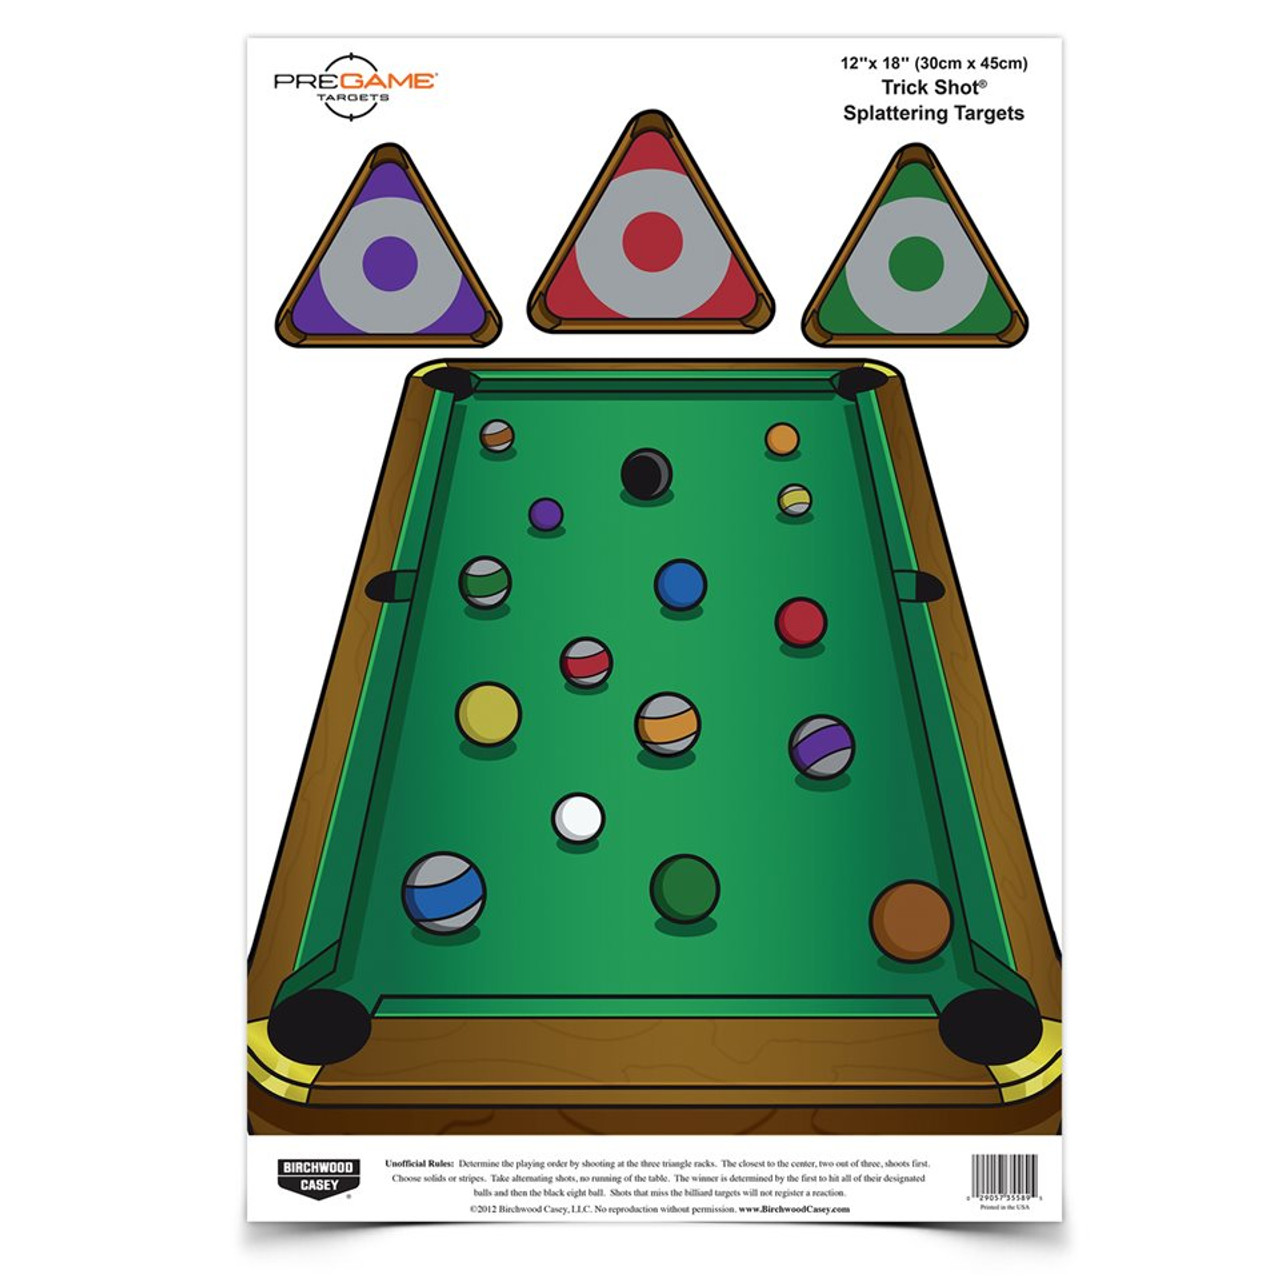 Birchwood Casey PREGAME 12 x 18 Inch Trick Shot, 8 Targets - Newest Products